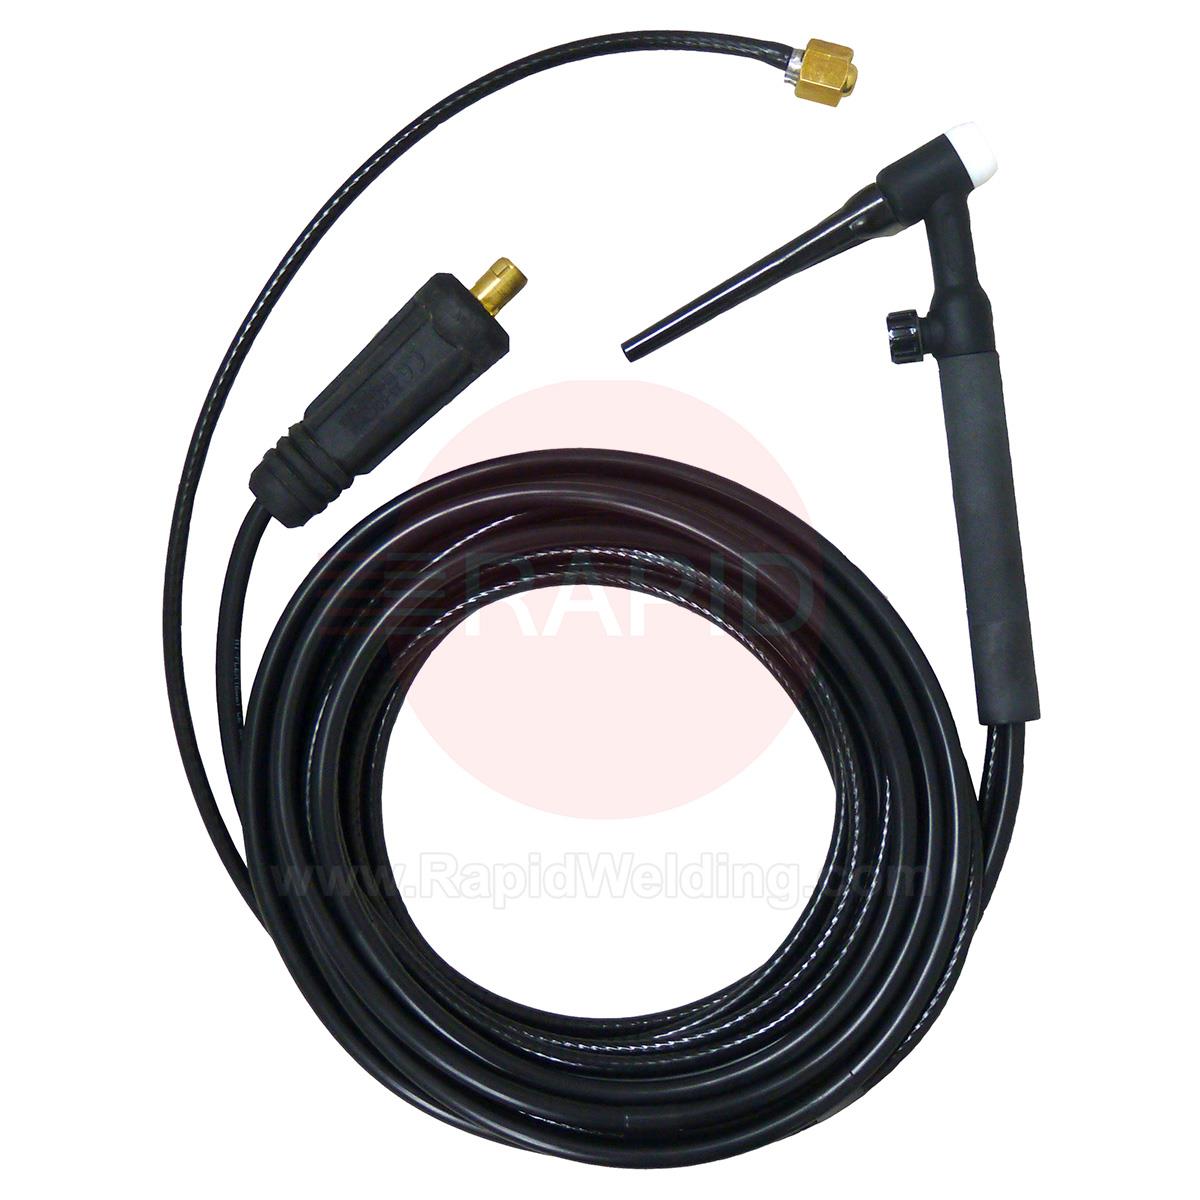 WP17V-12-2DL  WP17 Tig Torch with Gas Valve - Gas Hose 3/8 BSP, 4M Power Cable, 35mm Dinse Plug